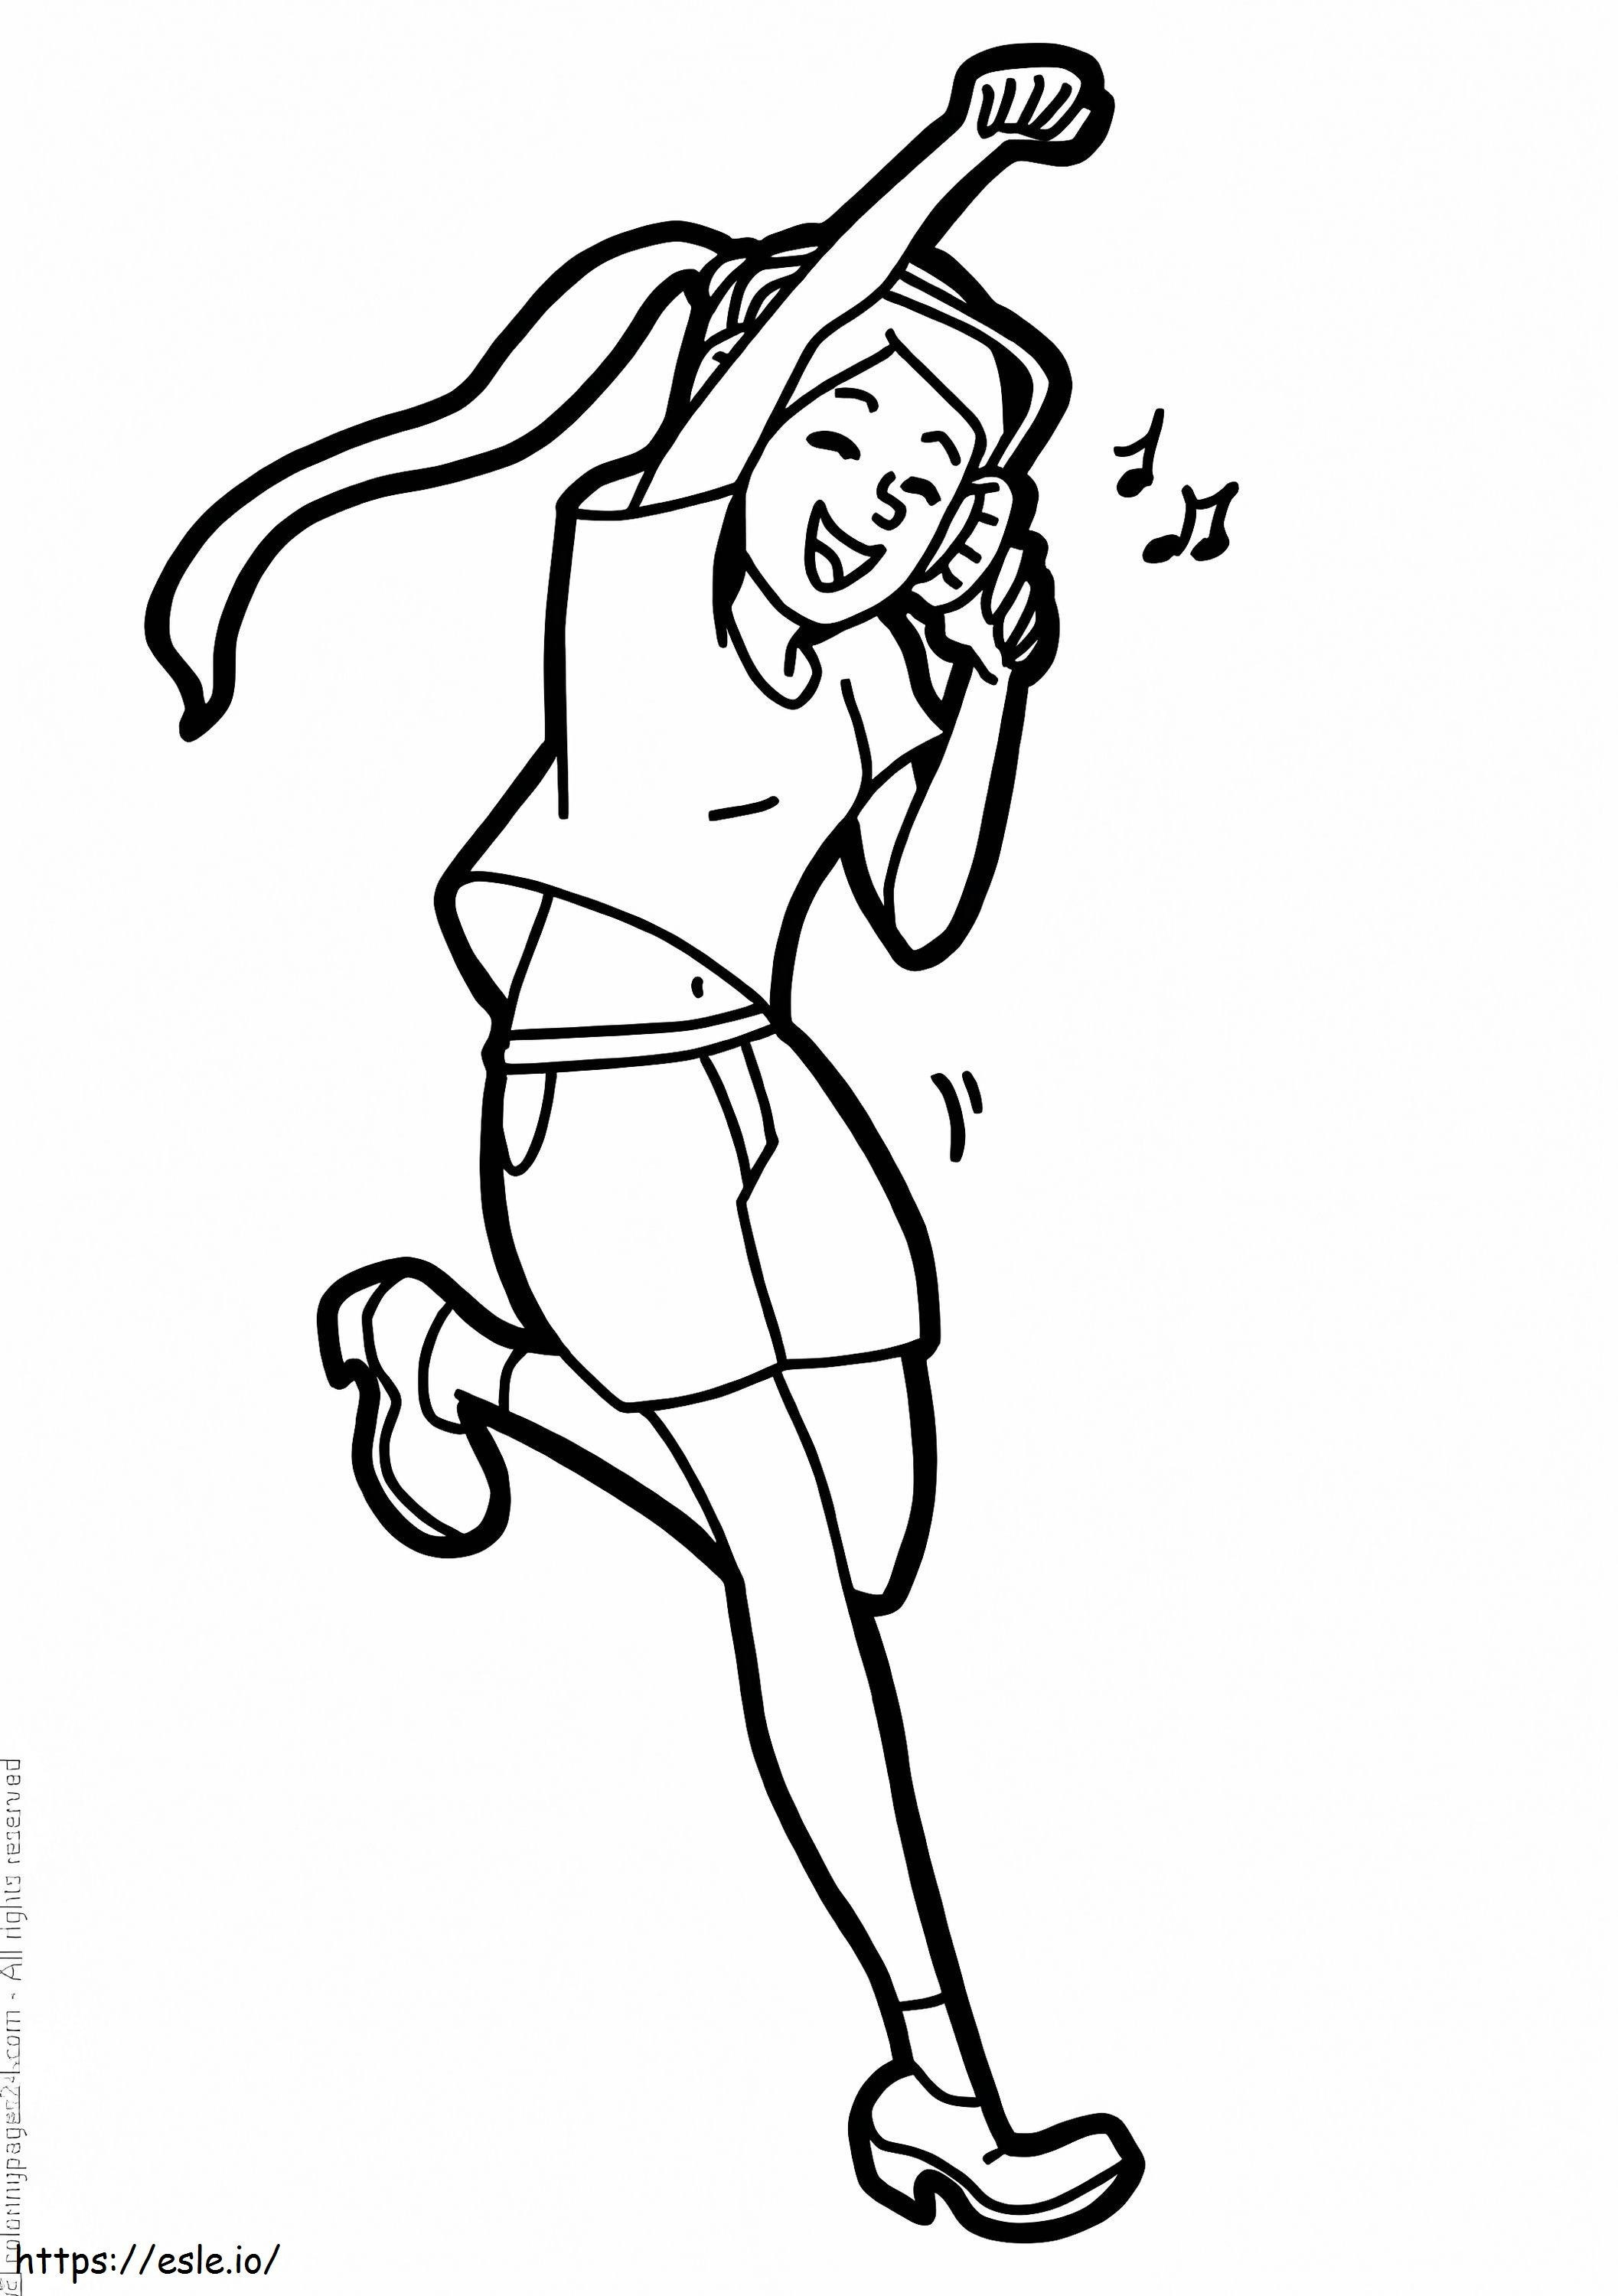 Young Dancer coloring page